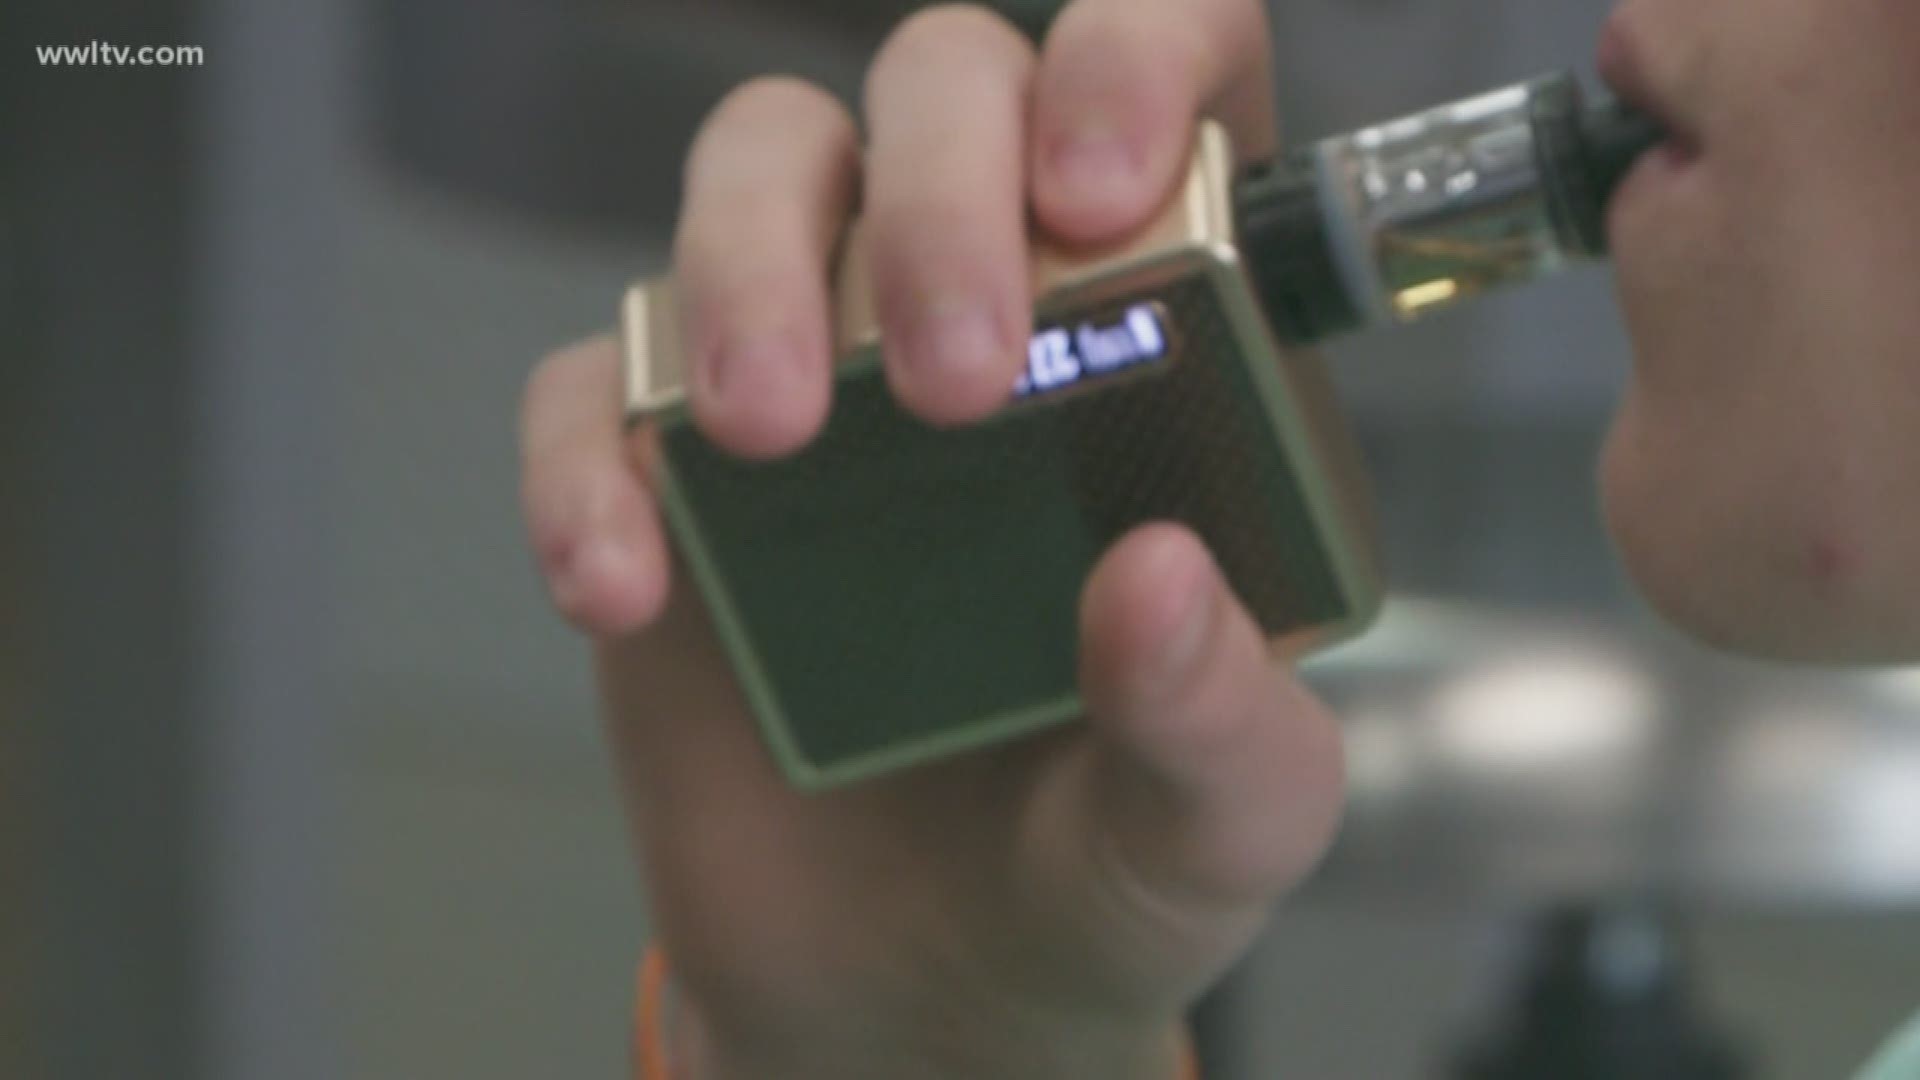 Doctors are telling people to stop vaping after a recent crisis with hundreds being hospitalized for pulmonary problems and several actually dying.